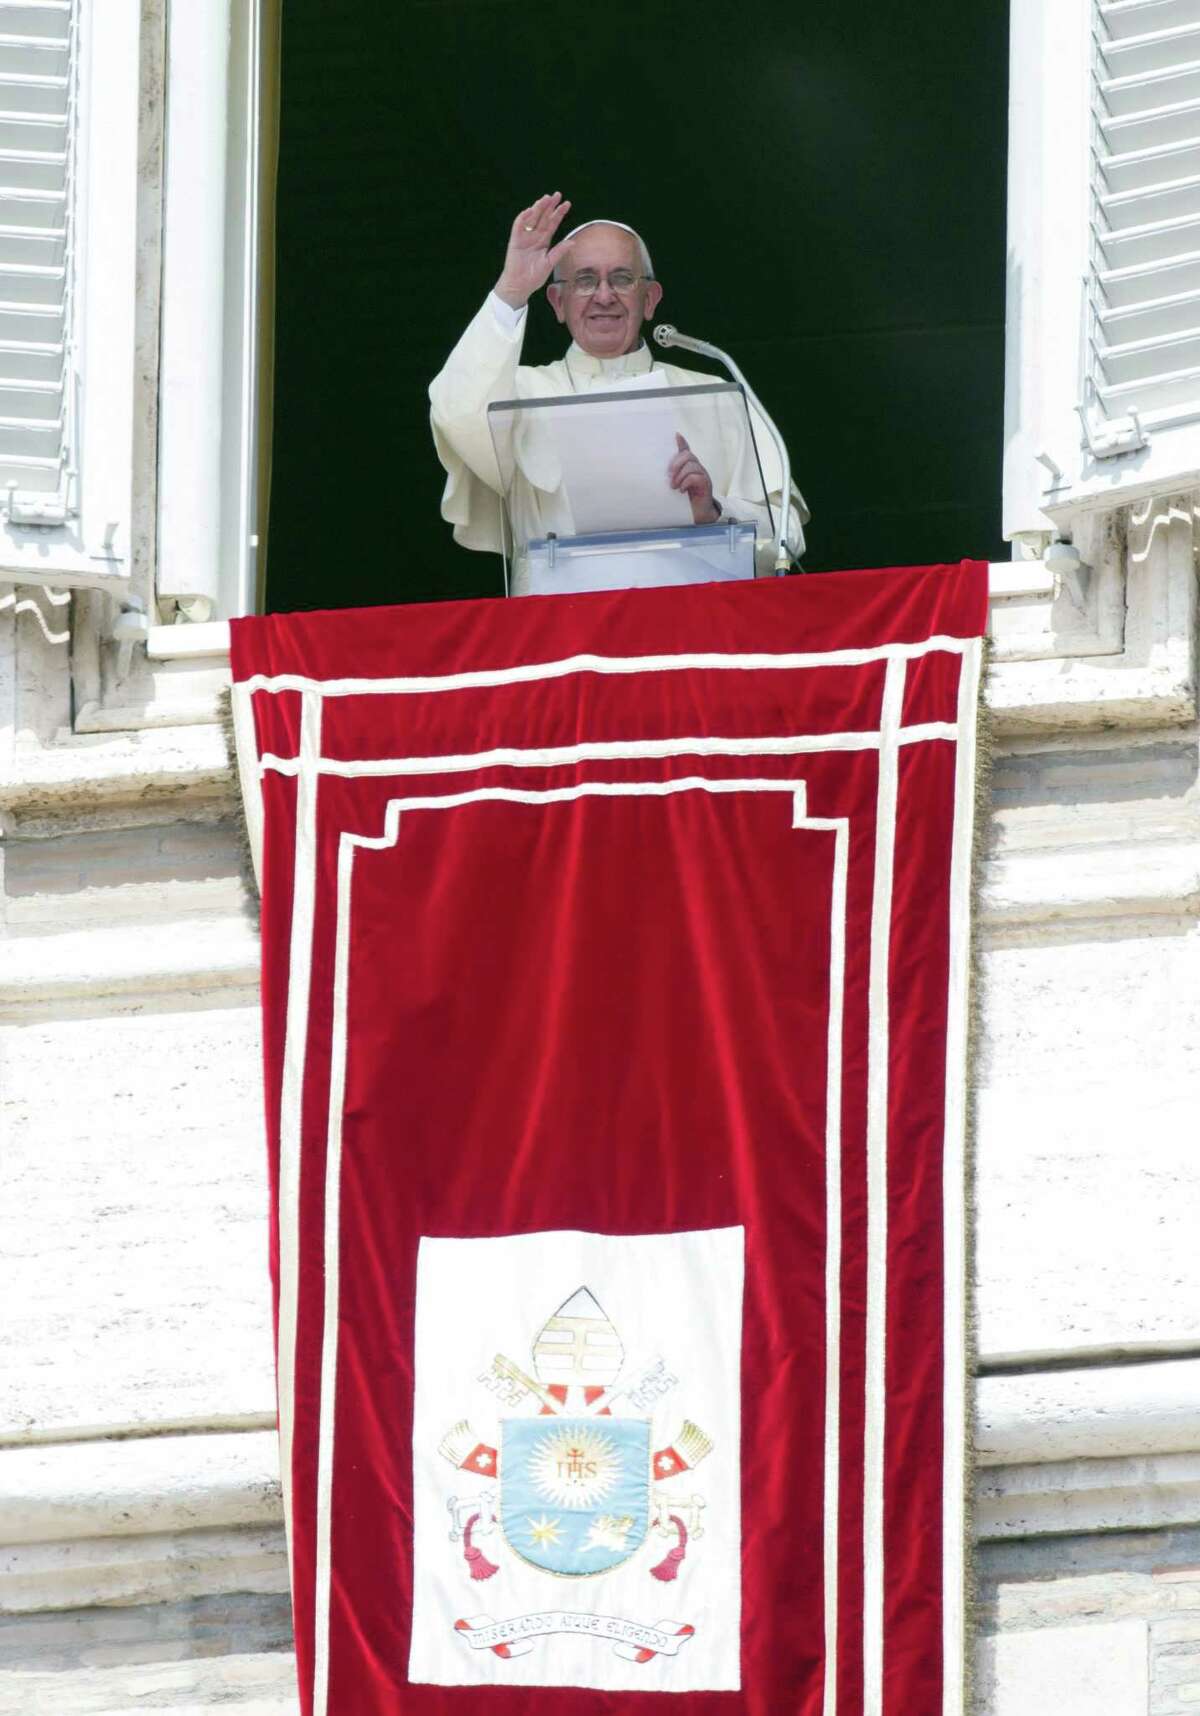 Pope Francis delivers his blessing during the Angelus noon prayer from his studio window overlooking St. Peter’s Square at the Vatican ib Sept. 6, 2015. The Vatican will shelter two families of refugees “who are fleeing death” from war or hunger, Pope Francis announced Sunday as he called on Catholic parishes, convents and monasteries across Europe to do the same.